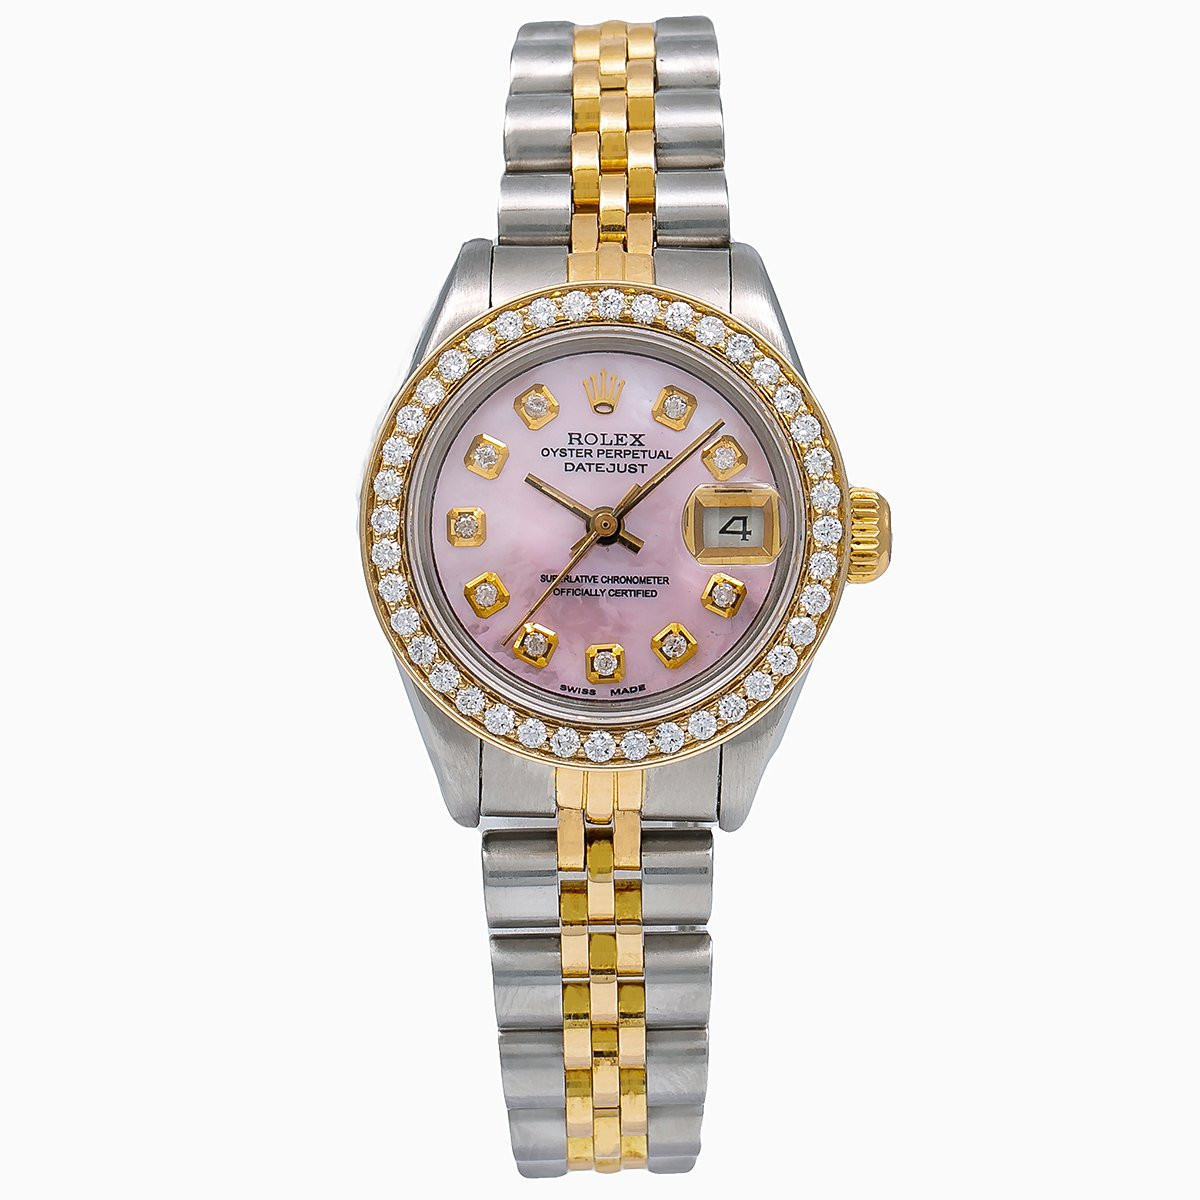 rolex oyster datejust gold